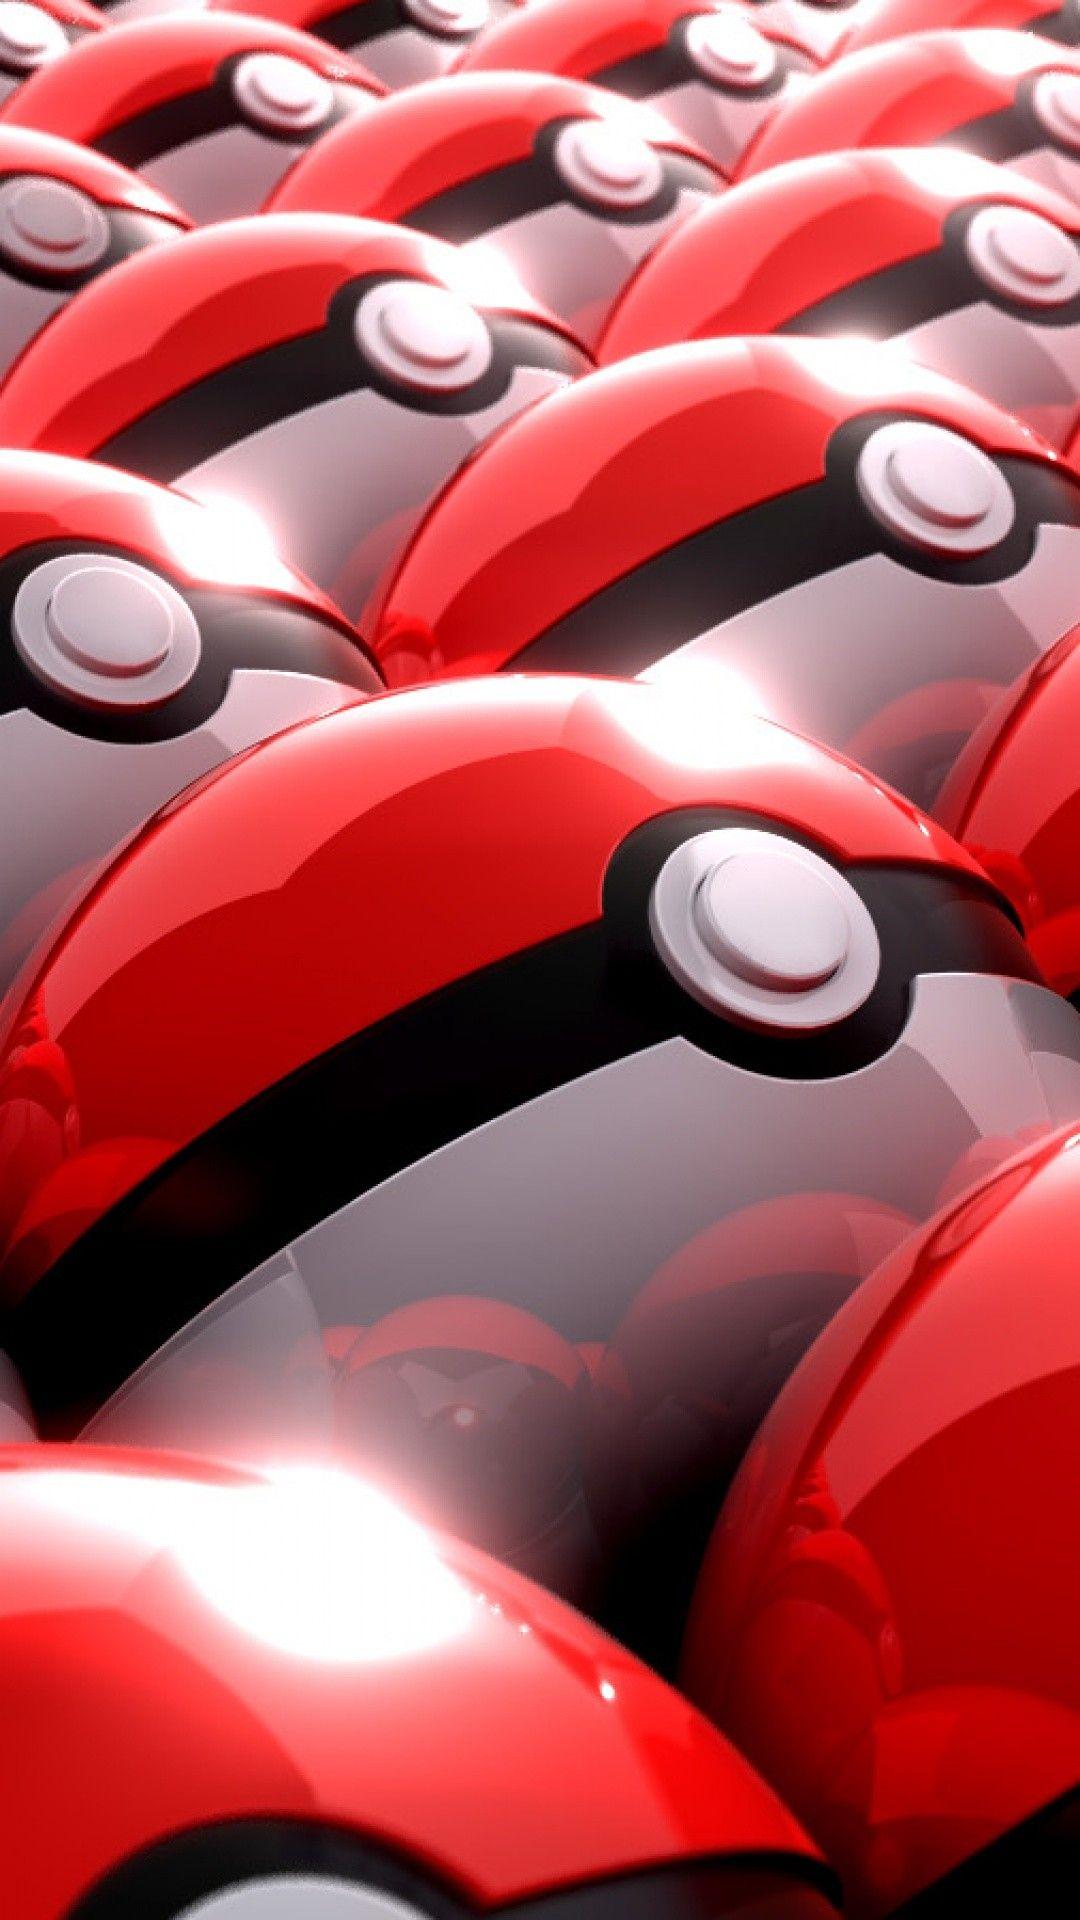 Pokeball Iphone Wallpapers Top Free Pokeball Iphone Backgrounds